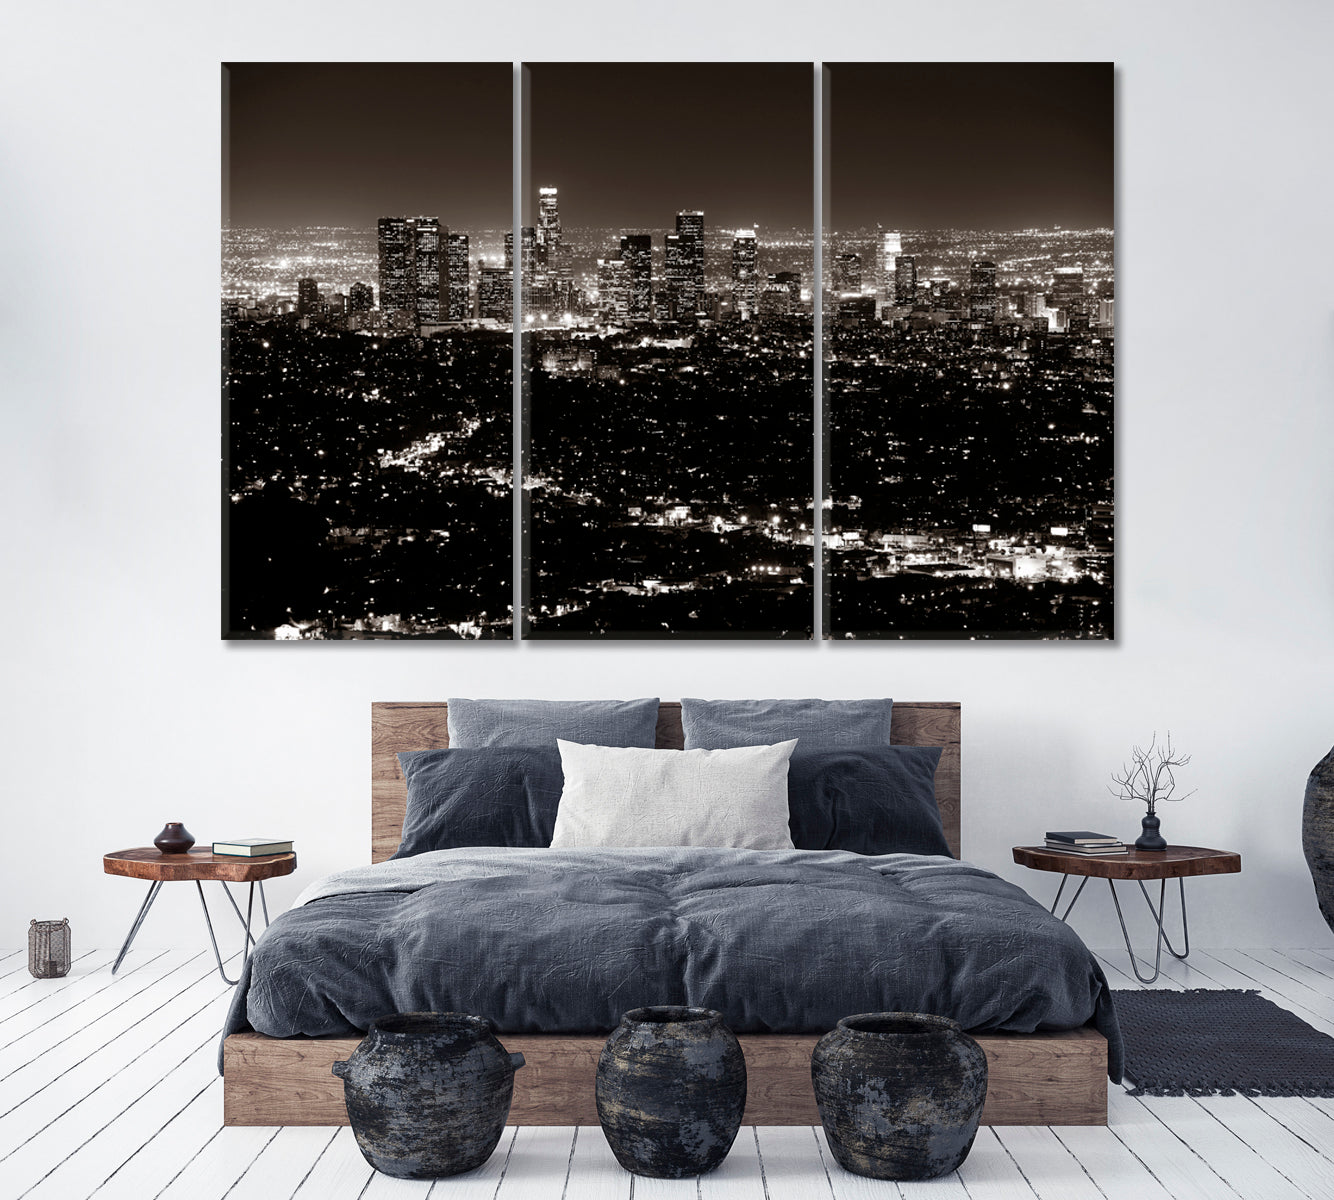 Los Angeles at Night Canvas Print ArtLexy 3 Panels 36"x24" inches 